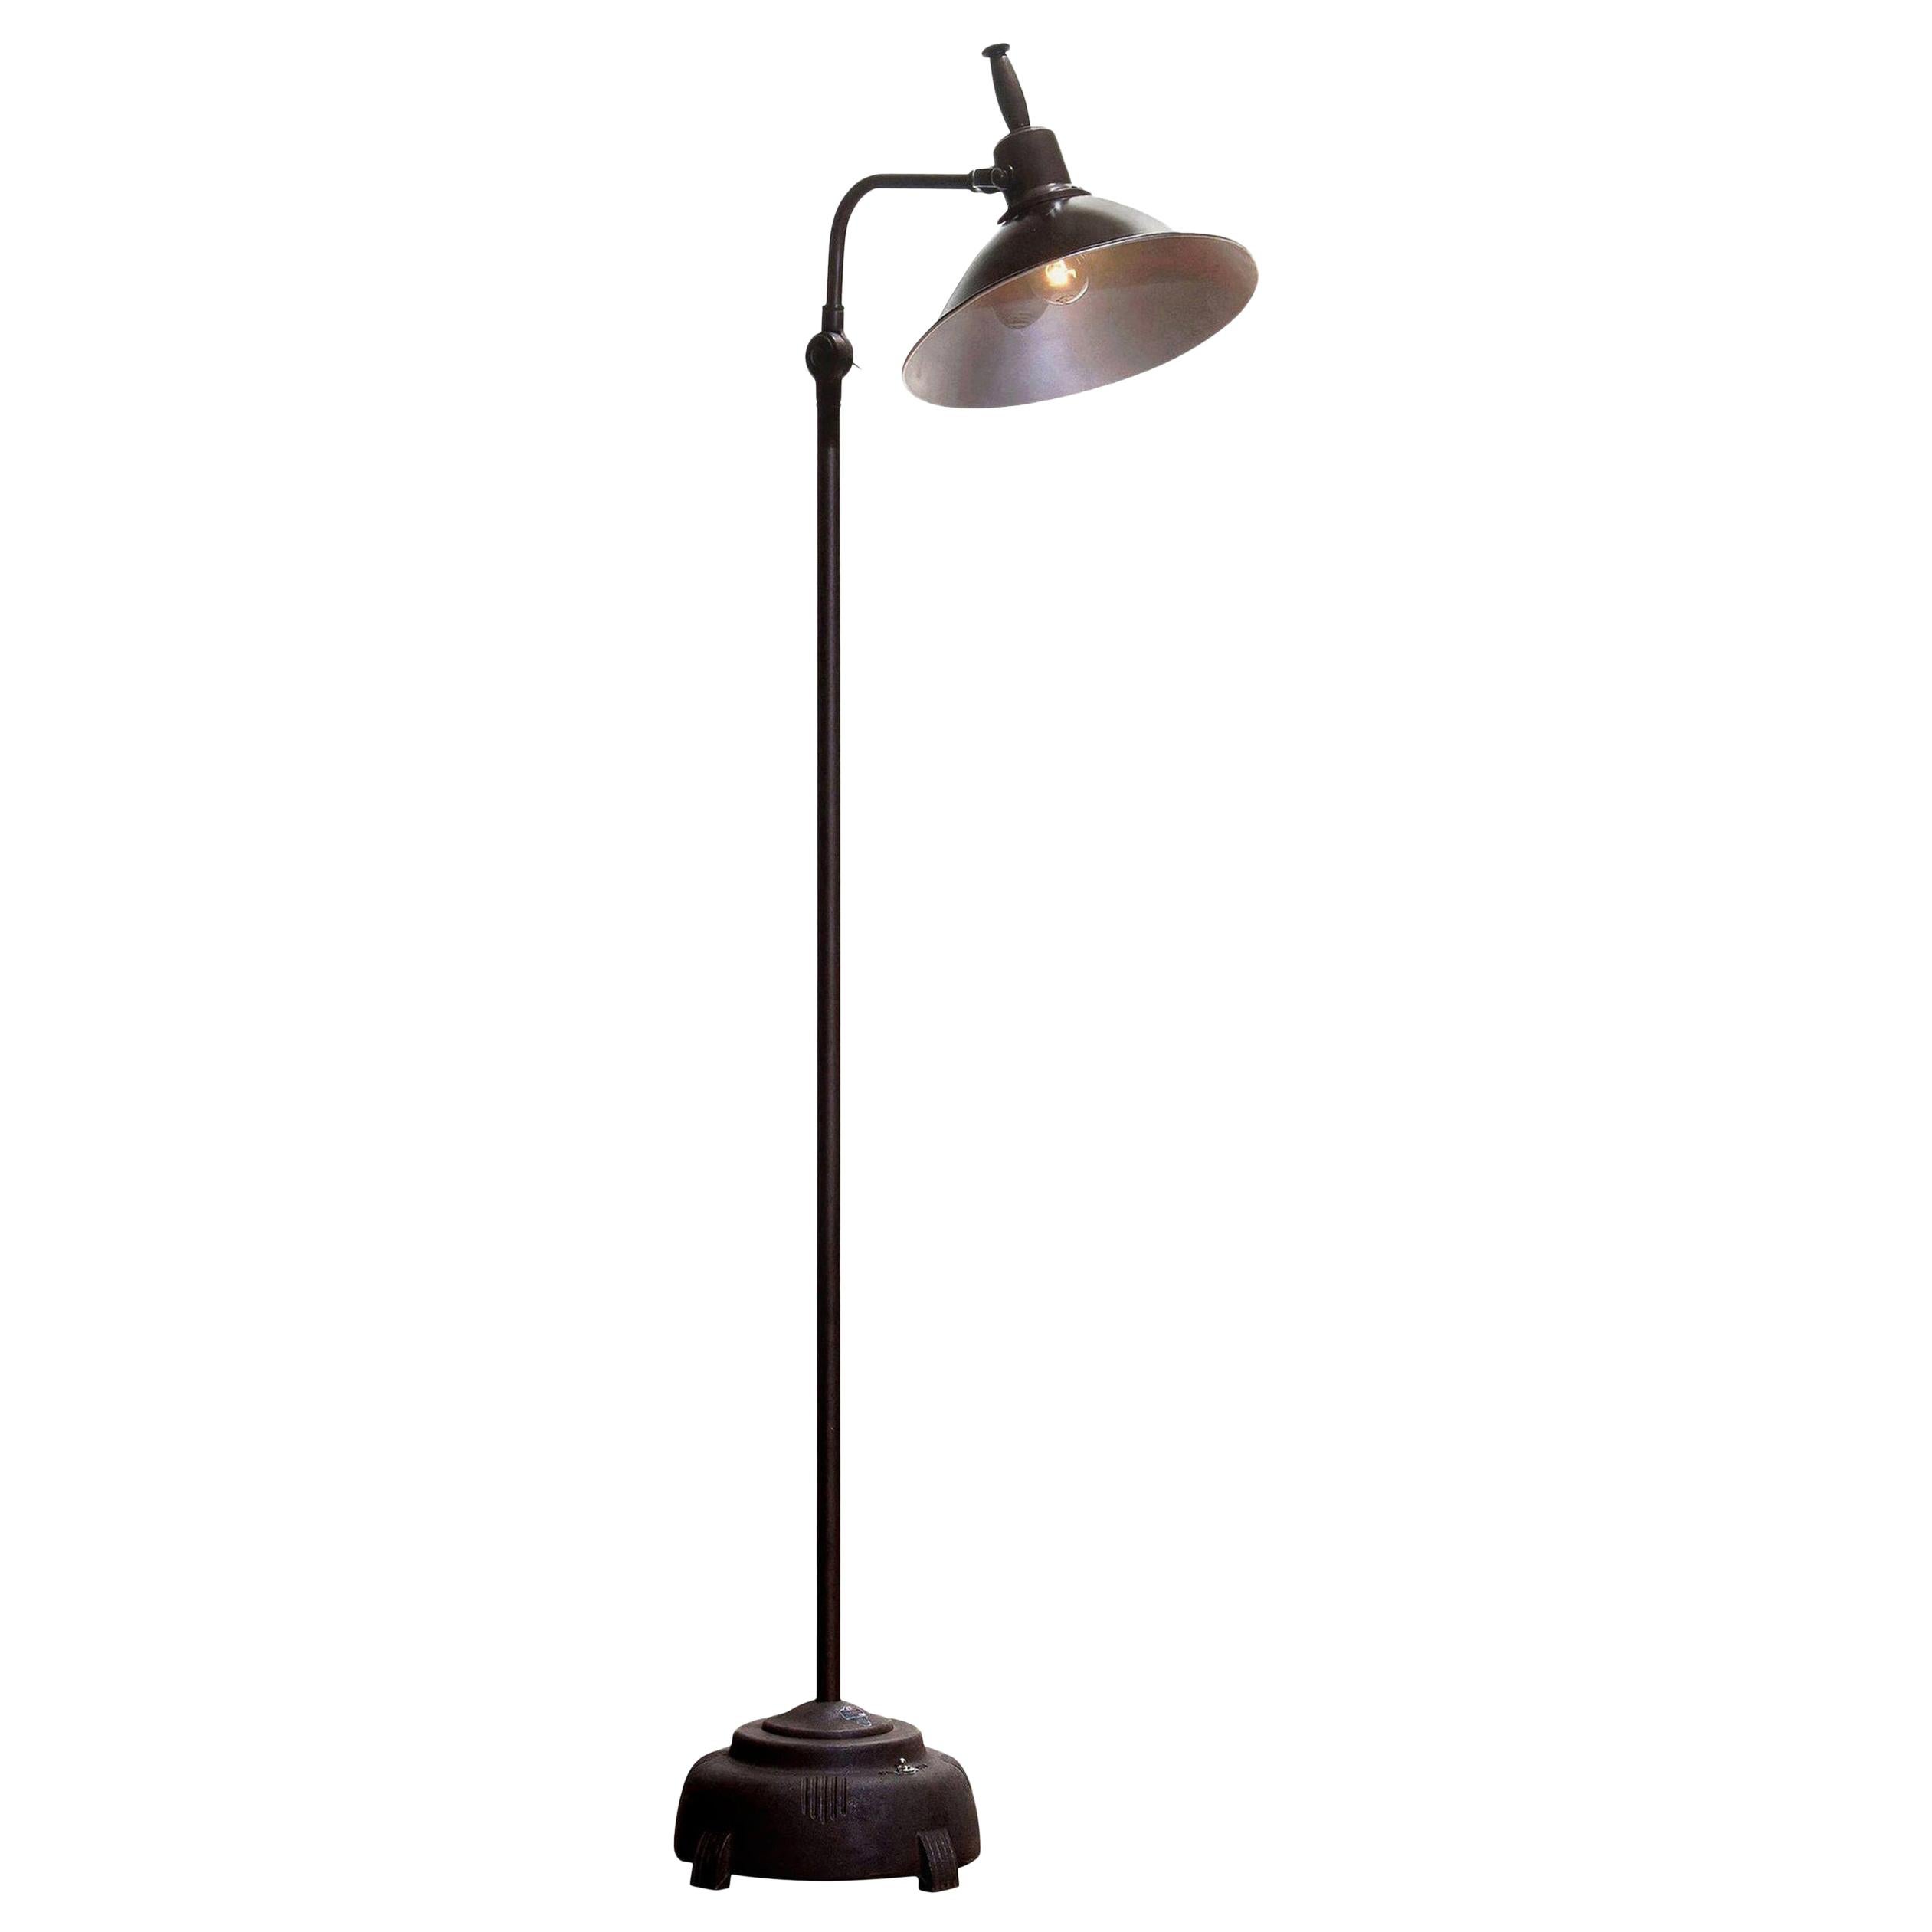 Absolutely amazing and in good condition industrial floor lamp (formal sunlamp) from Faries Manufacturing MFG & Co. made in Illinois USA in brass or cast iron or aluminum!
The lamp is newly wired and therefore suitable for 220 / 110 volts max. 100